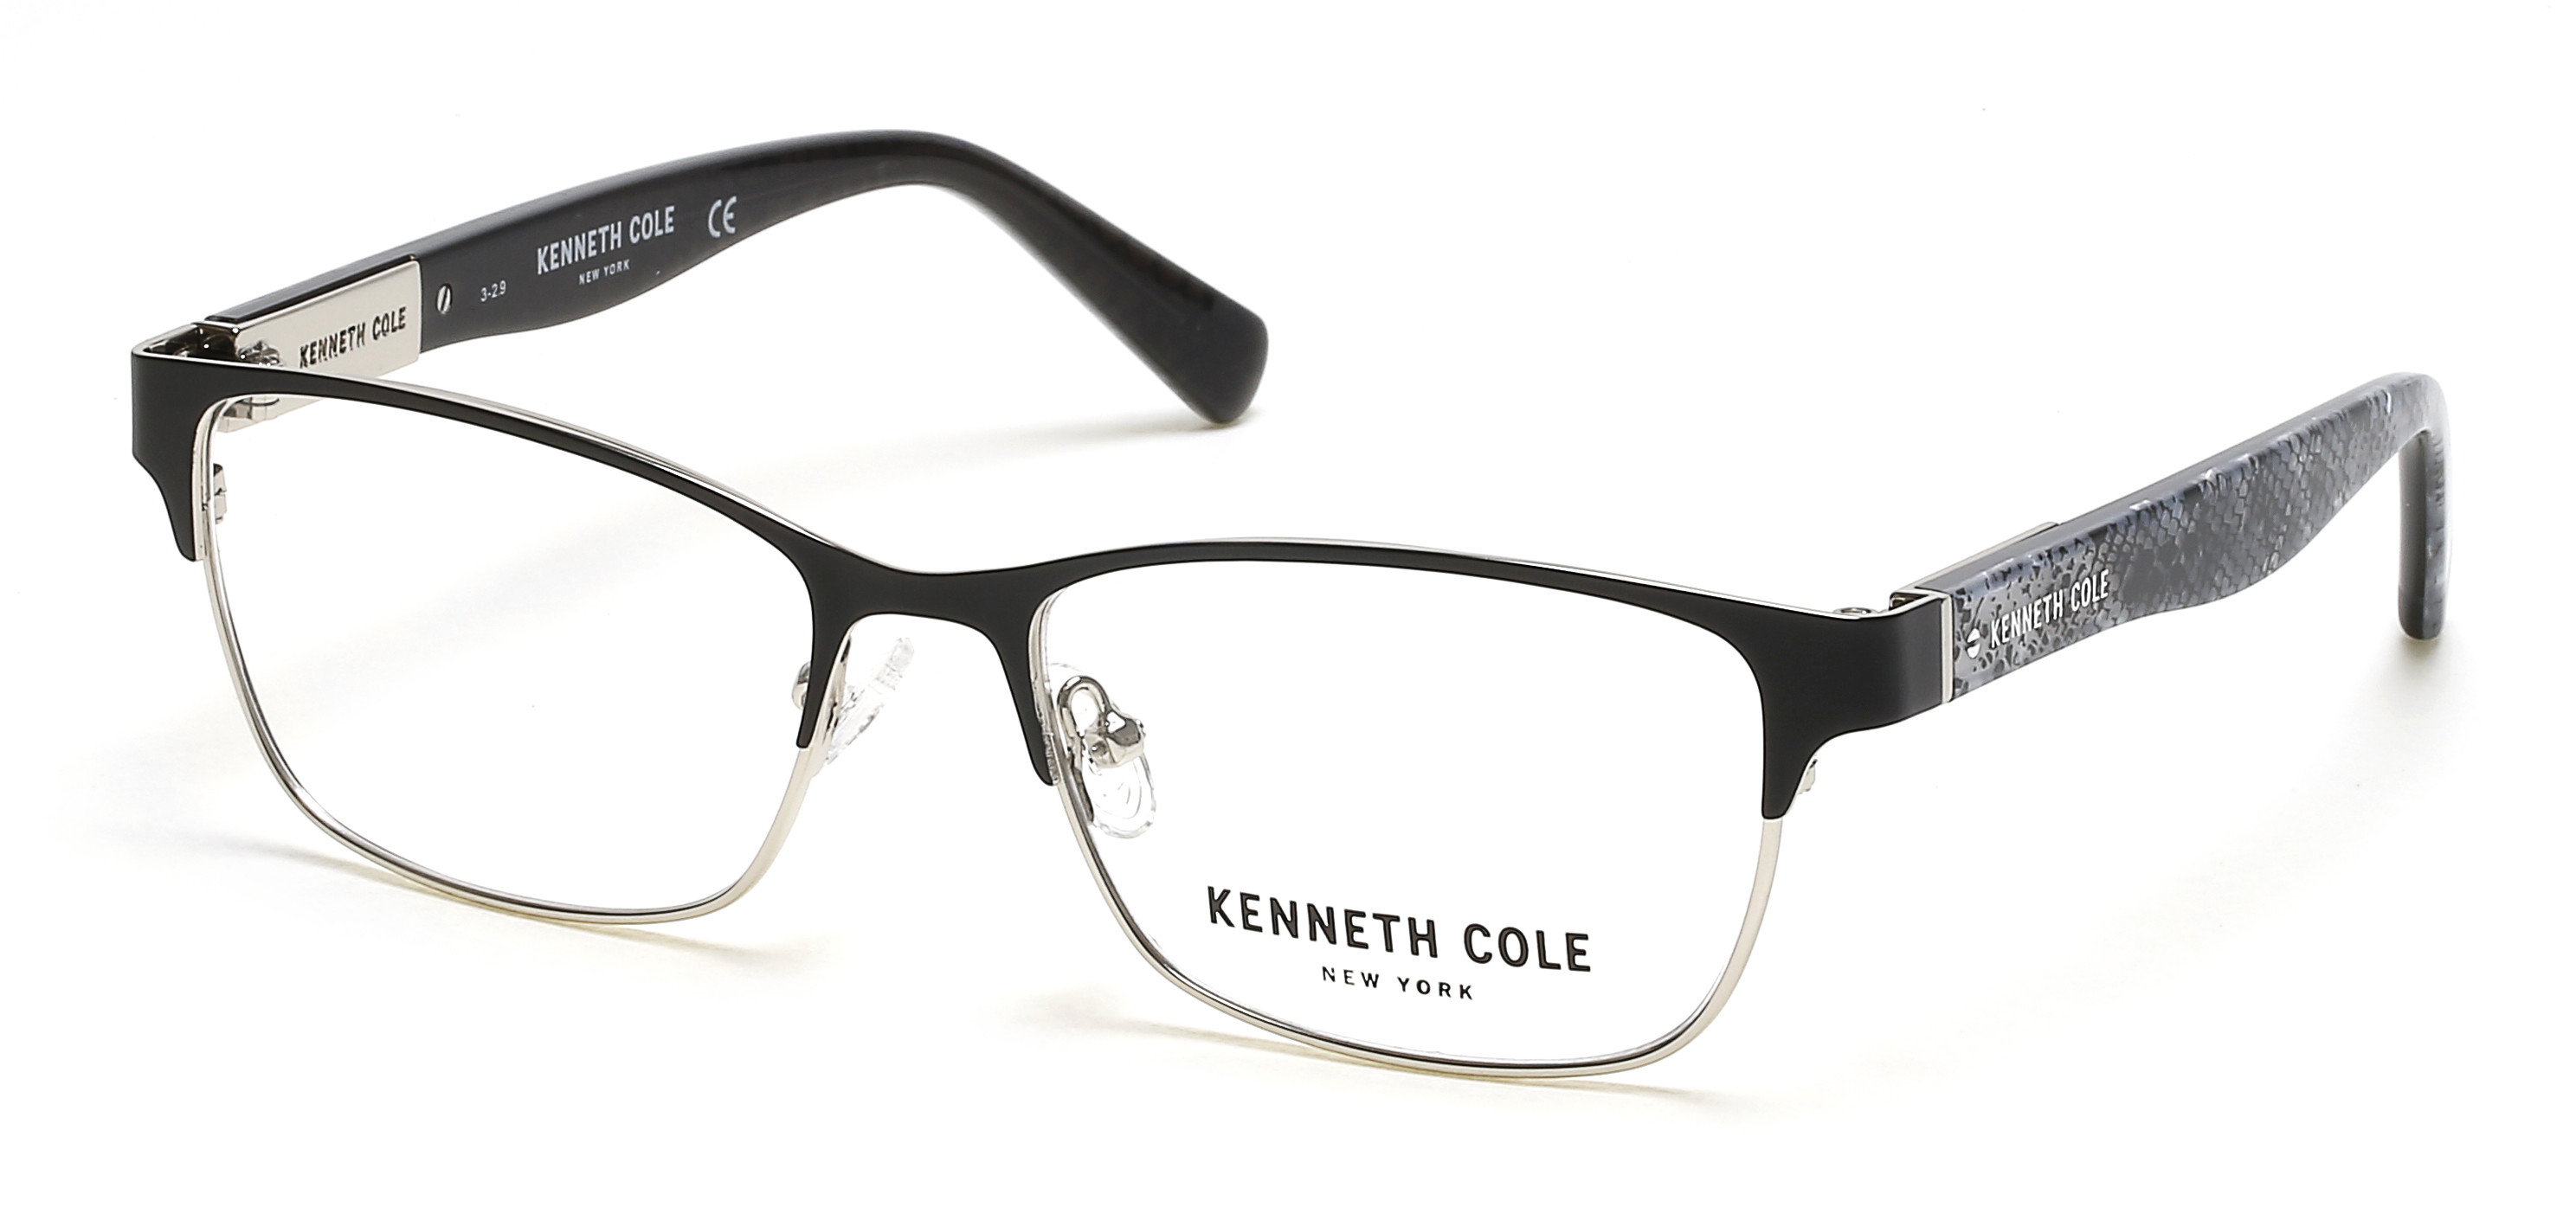 KENNETH COLE NY 0317 002